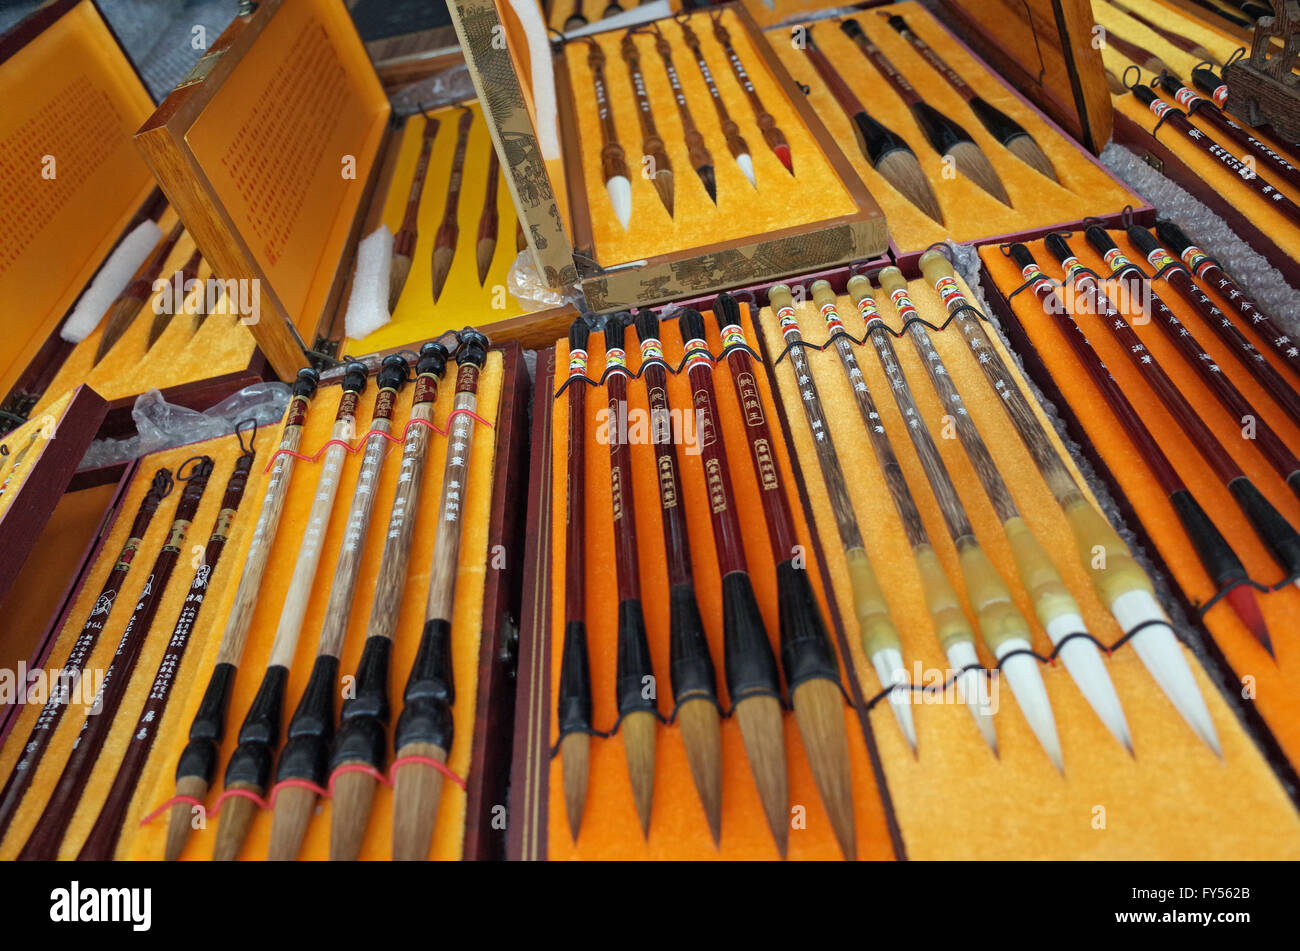 Chinese calligraphy brush sets in boxes in Xian, China Stock Photo